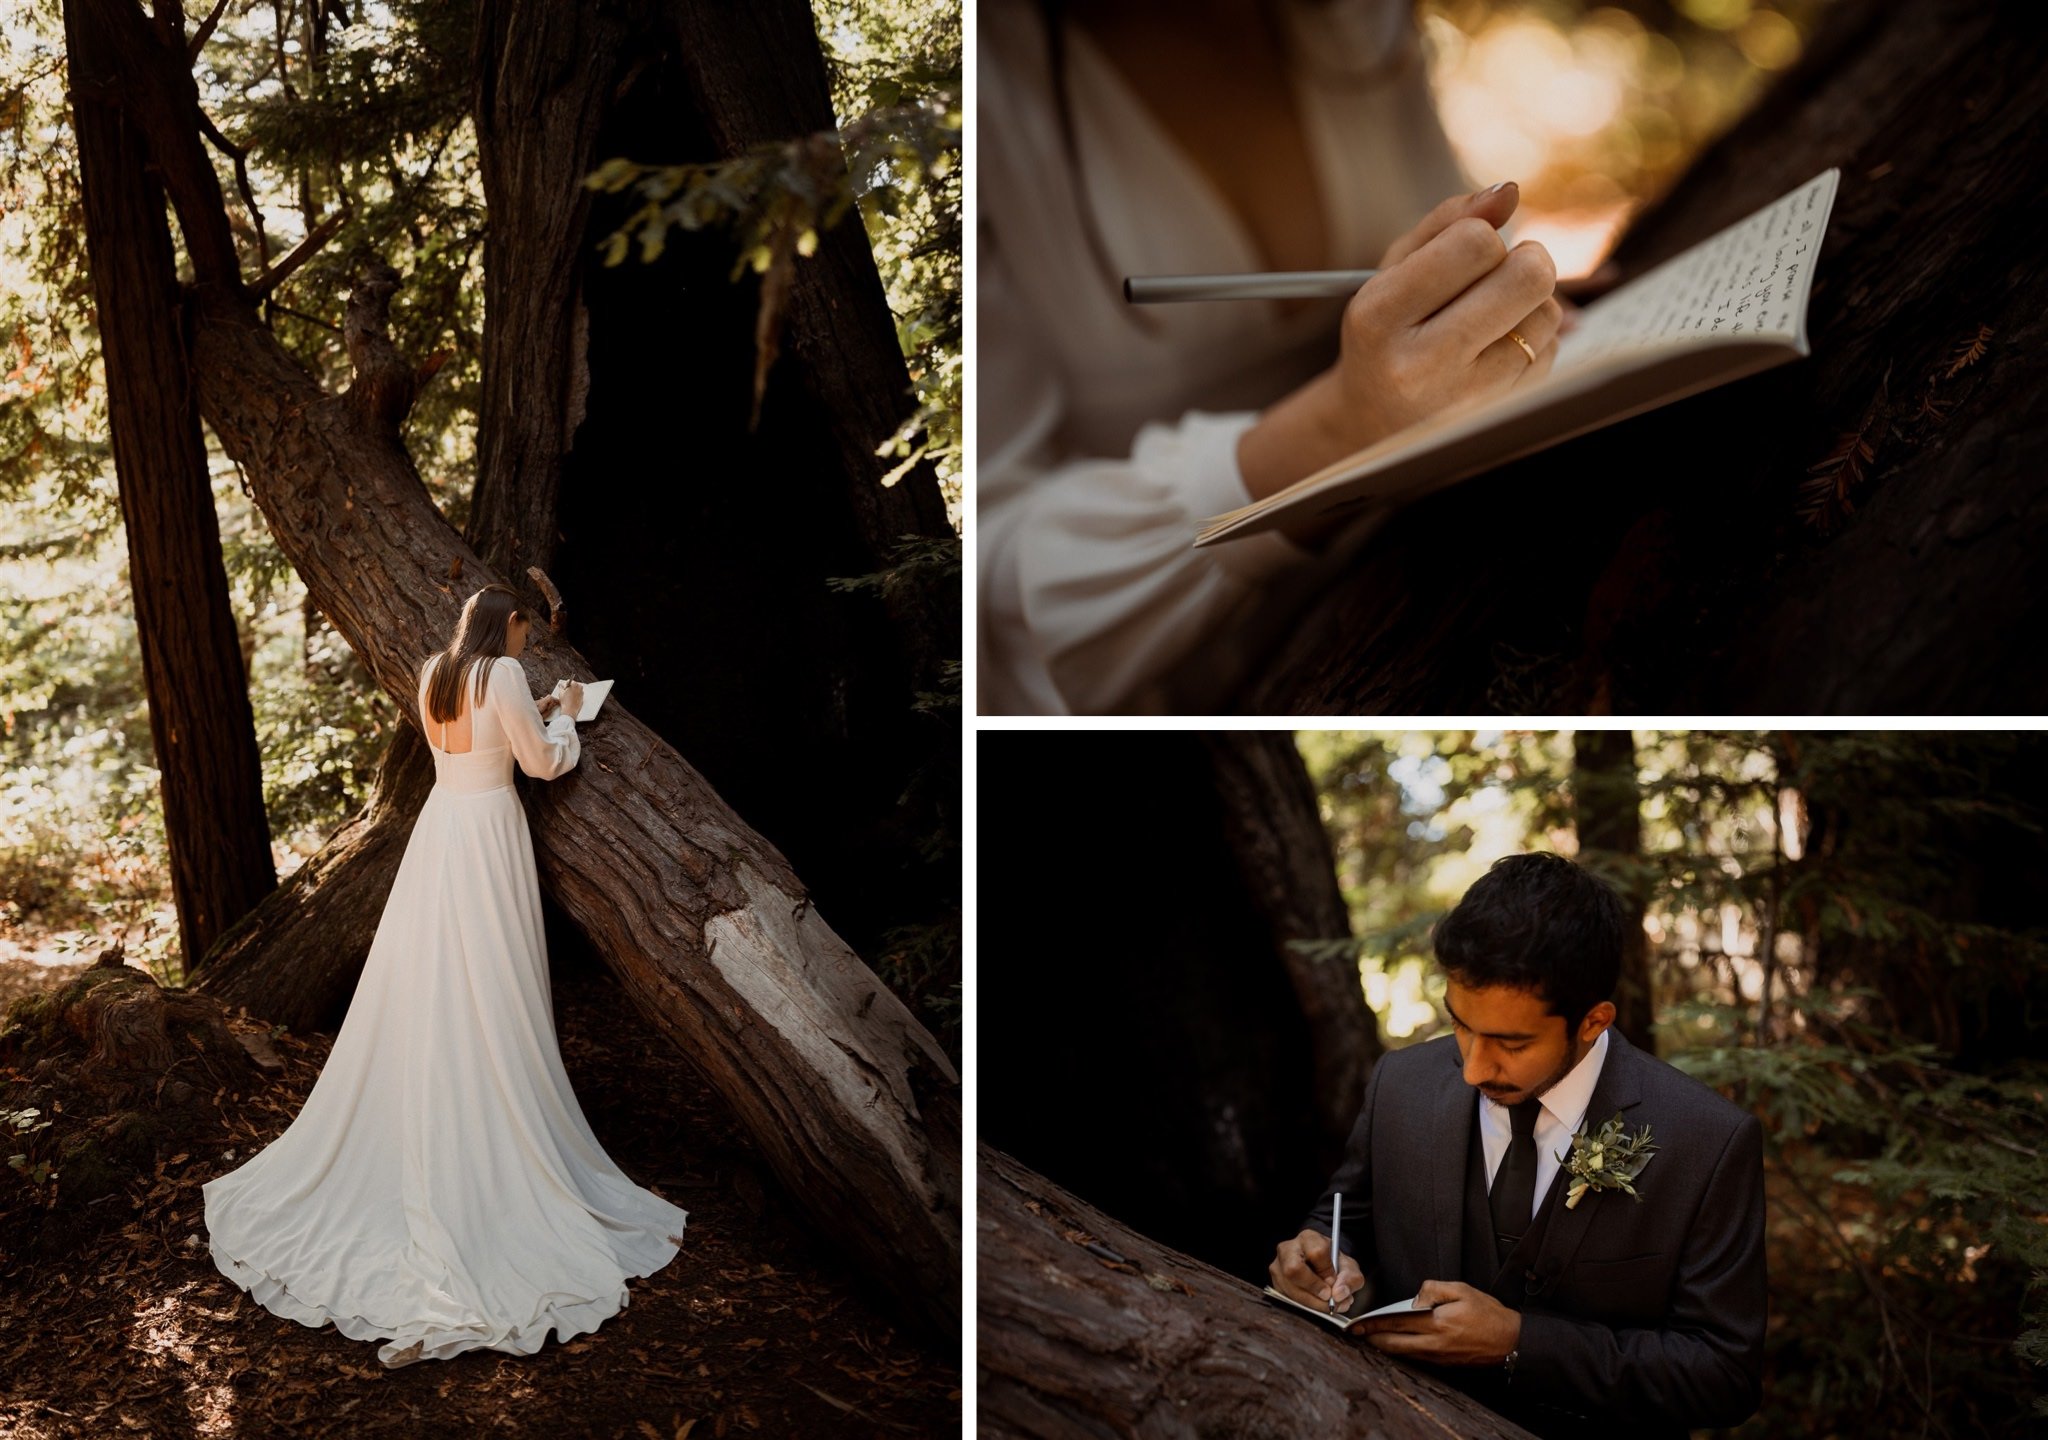 037_Two-Day Big Sur Redwoods Elopement with Family_Will Khoury Elopement Photographer.jpg